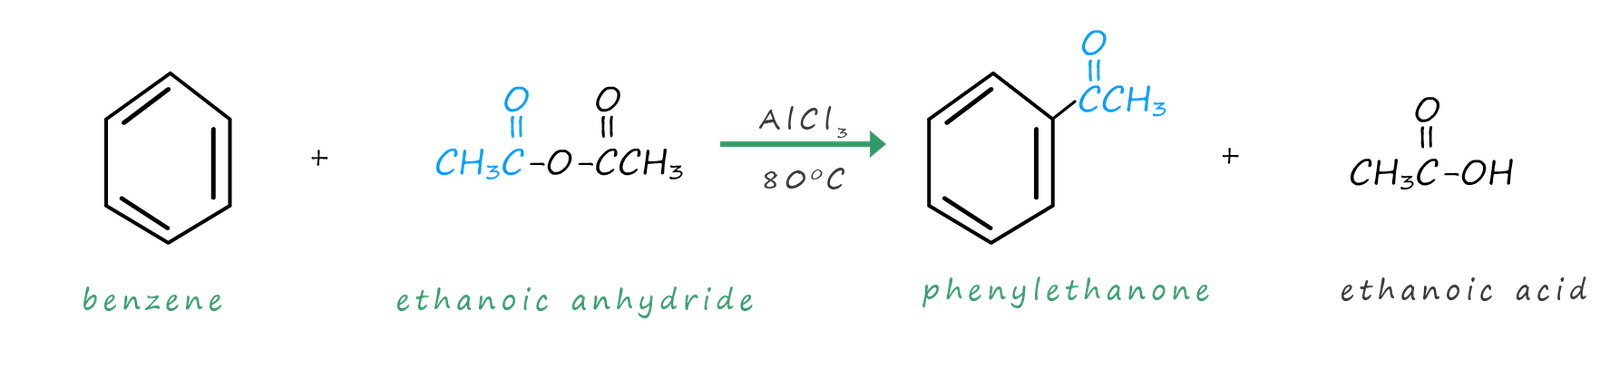 Friedel-Crafts acylation using an acid anhydride as the acylating agent